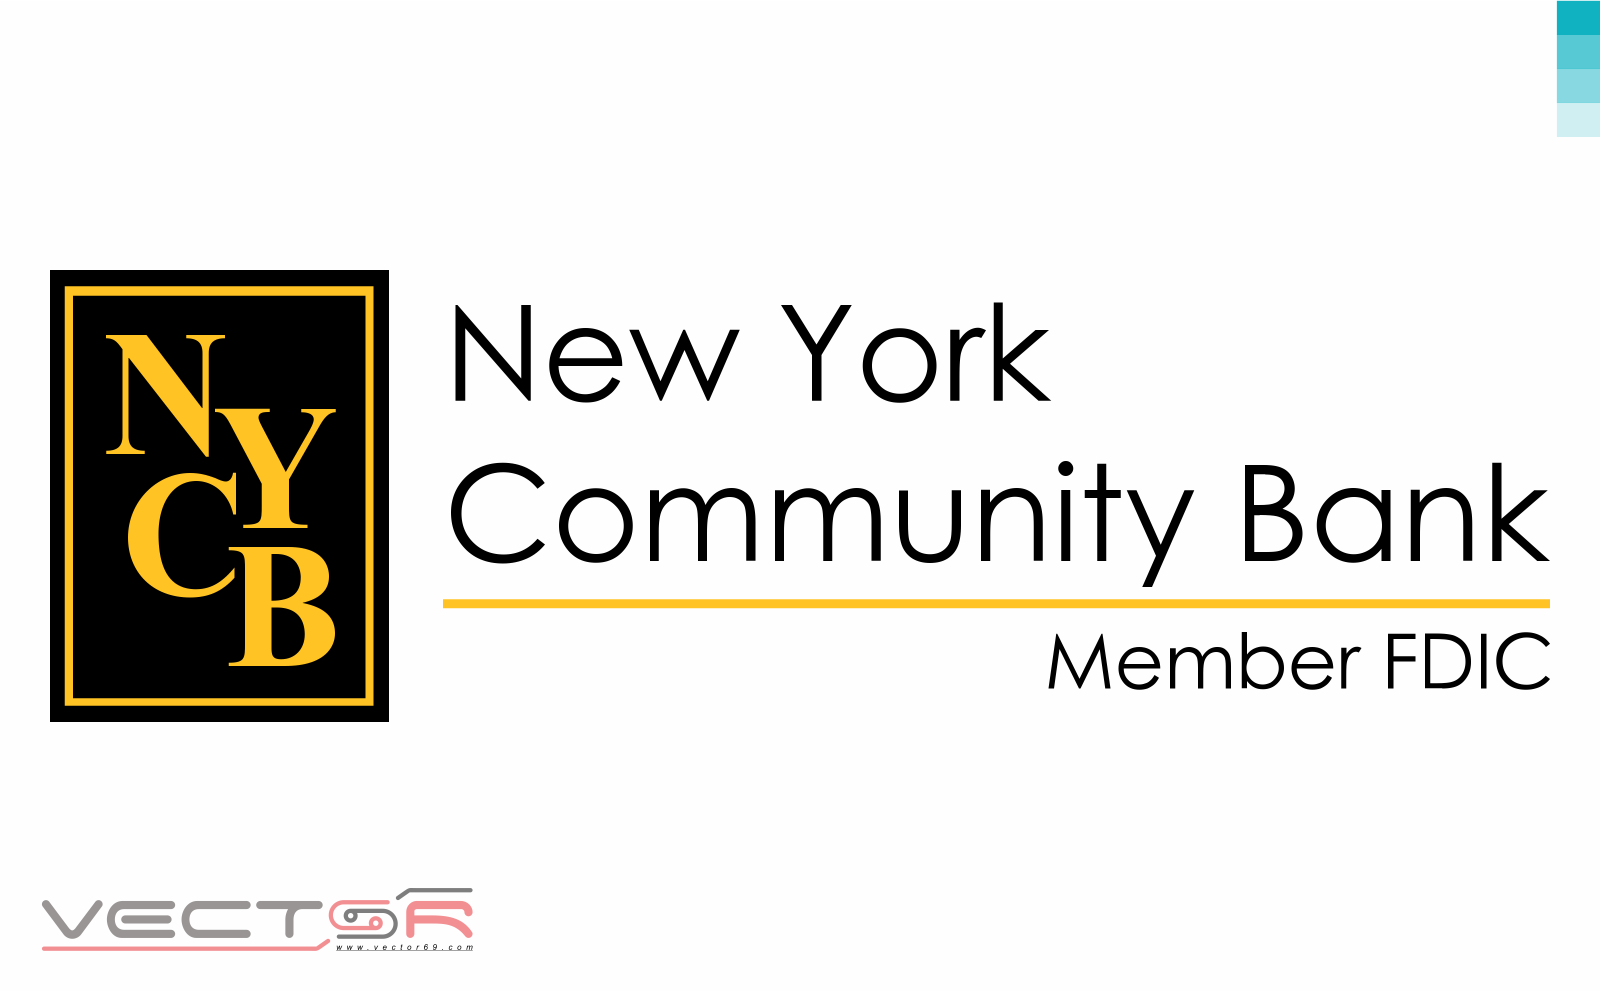 New York Community Bank Logo - Download Vector File SVG (Scalable Vector Graphics)